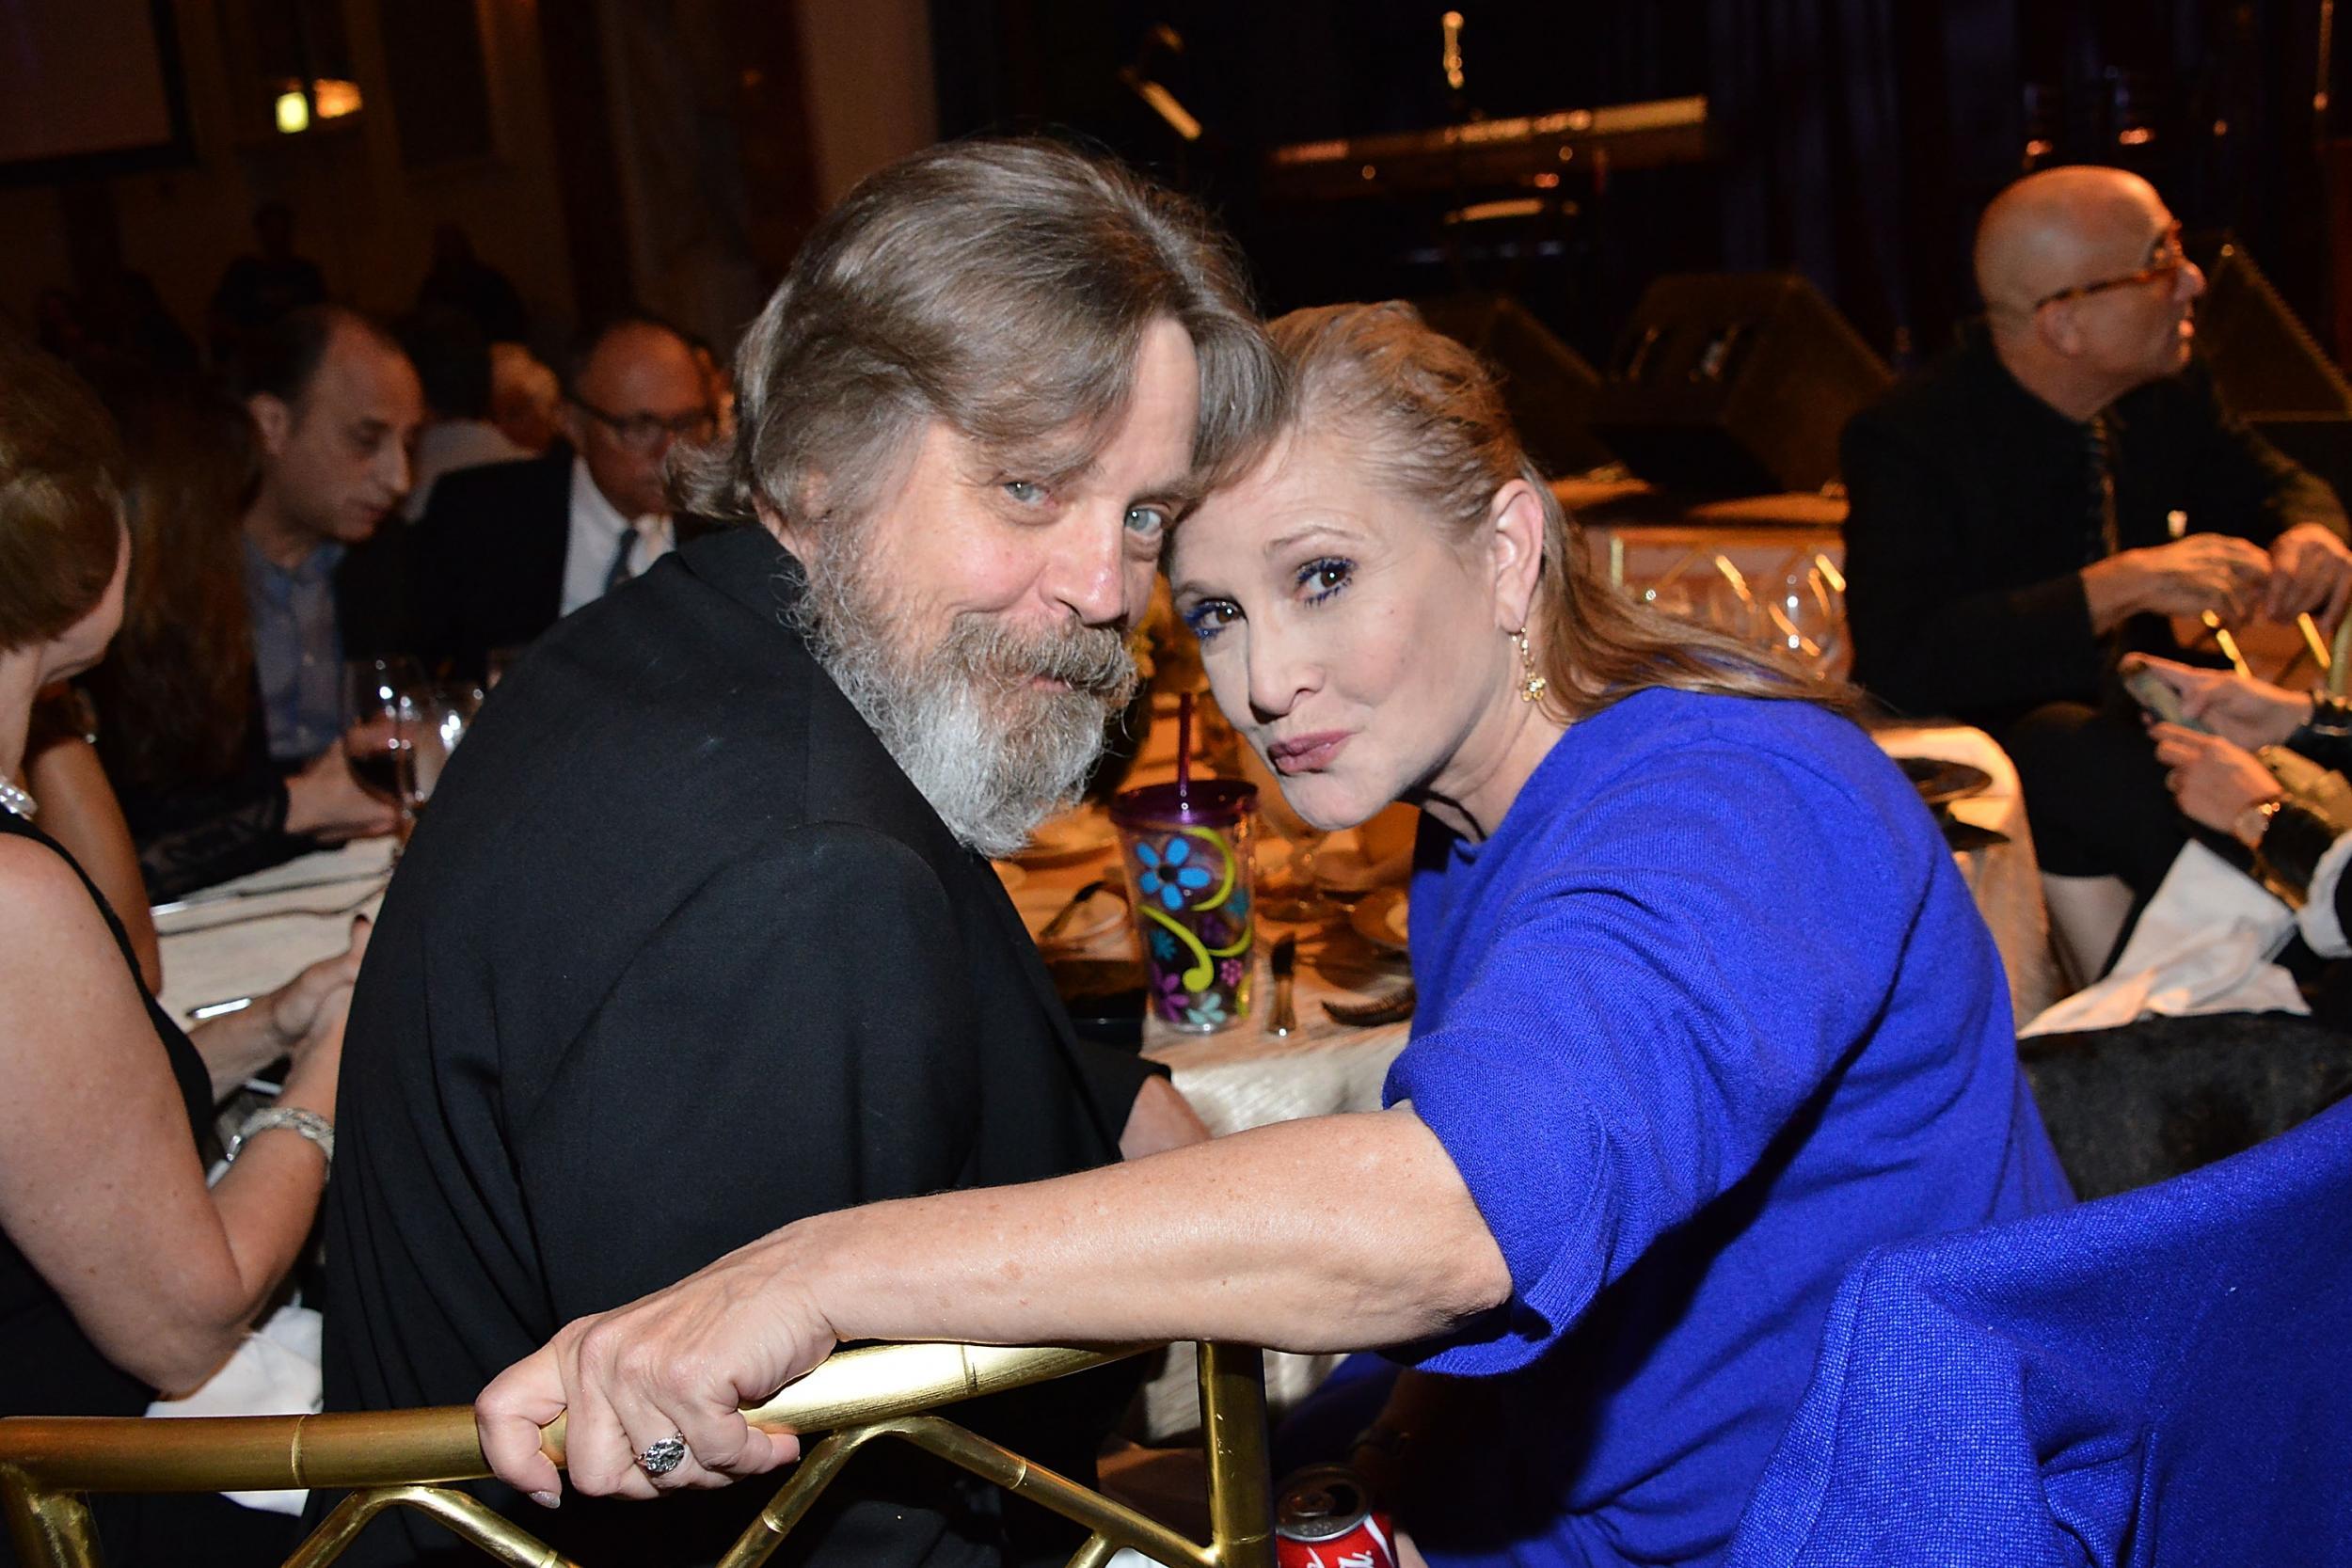 Mark Hamill and Carrie Fisher attend the Midnight Mission's 100 year anniversary Golden Heart Gala held at the Beverly Wilshire Four Seasons Hotel on September 30, 2014 in Beverly Hills, California. Credit: Araya Diaz/Getty Images for The Midnight Mission